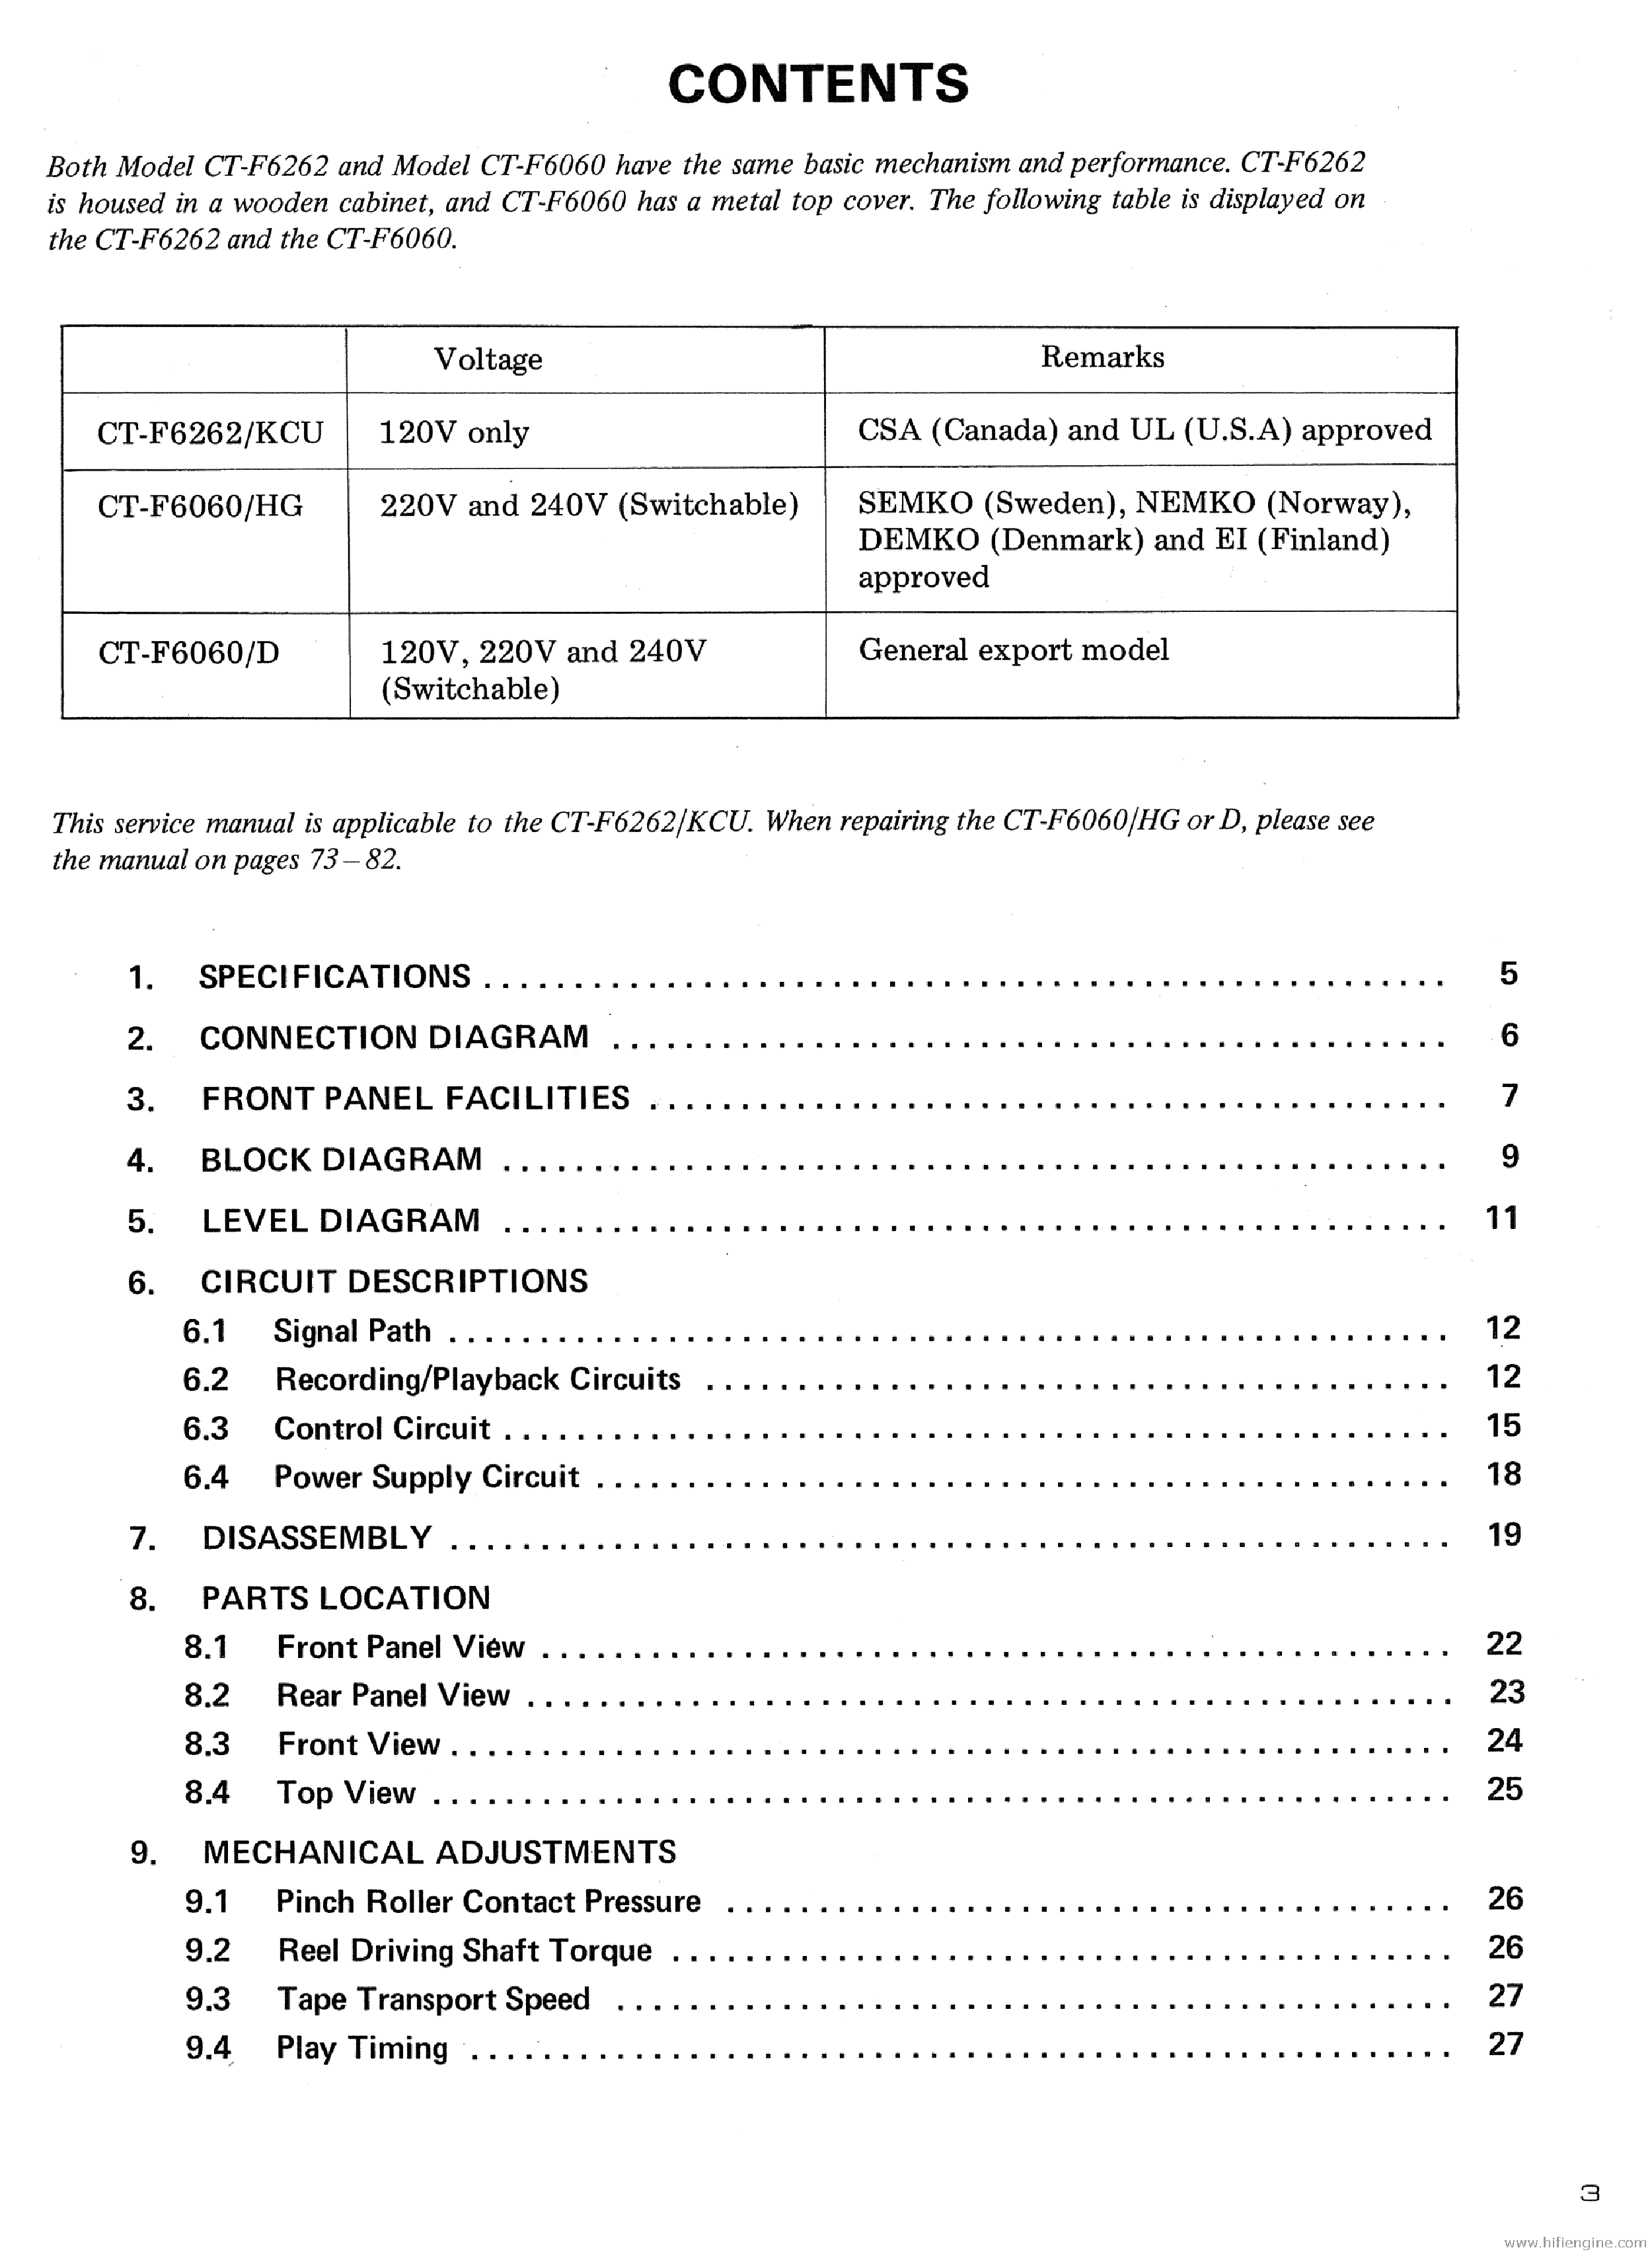 PIONEER CT-F6262 CT-F6060 service manual (2nd page)